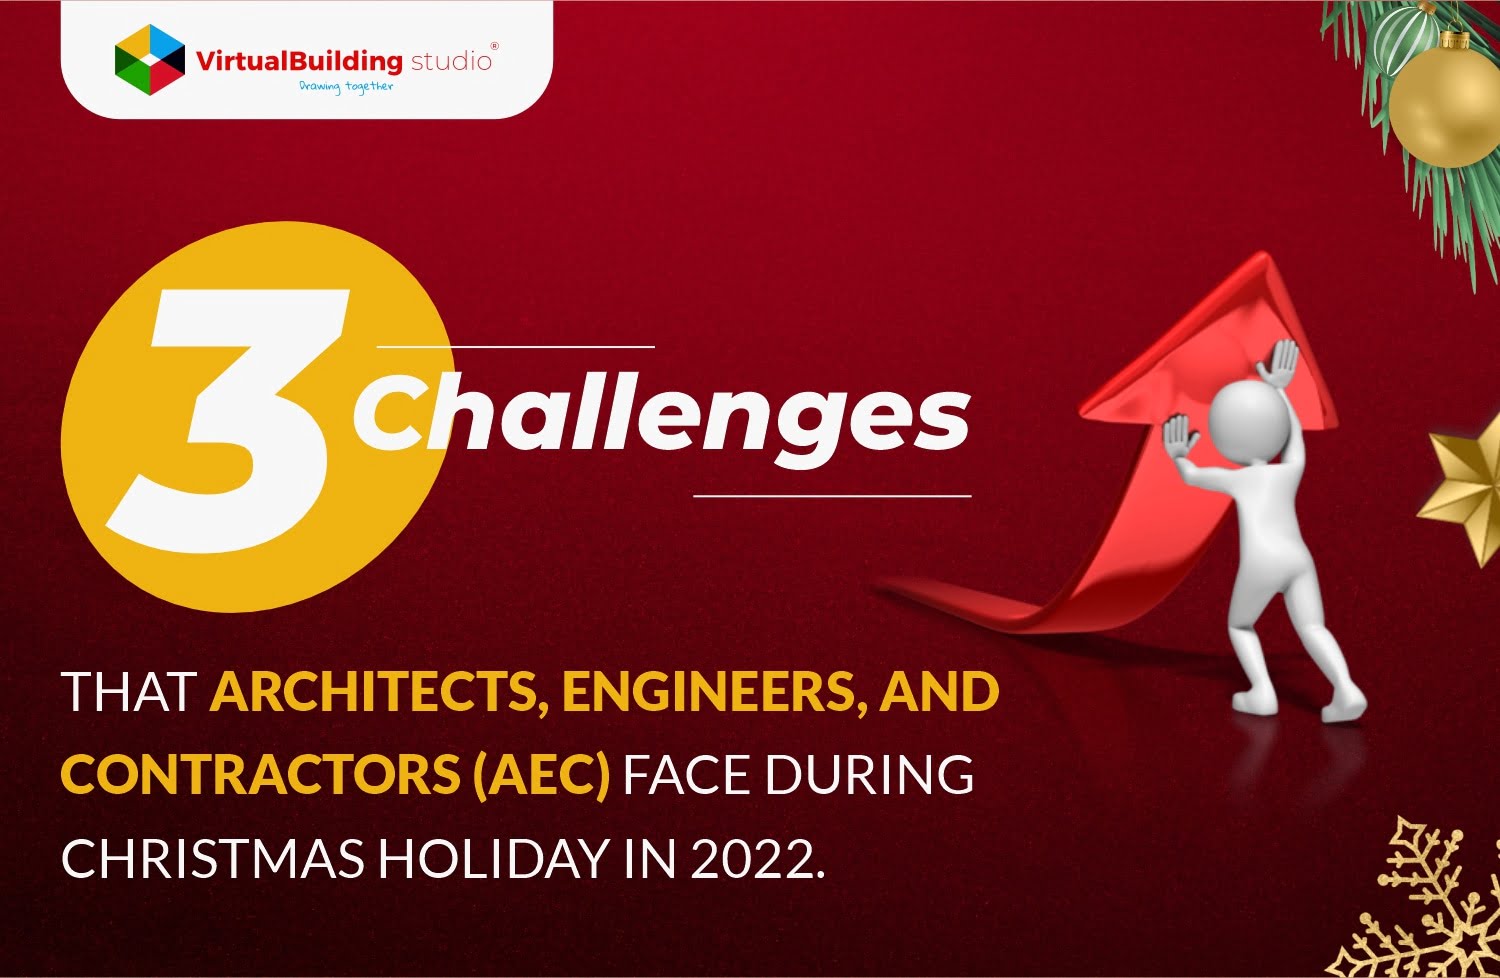 3 Challenges of AEC Industry during Christmas Holiday 2022